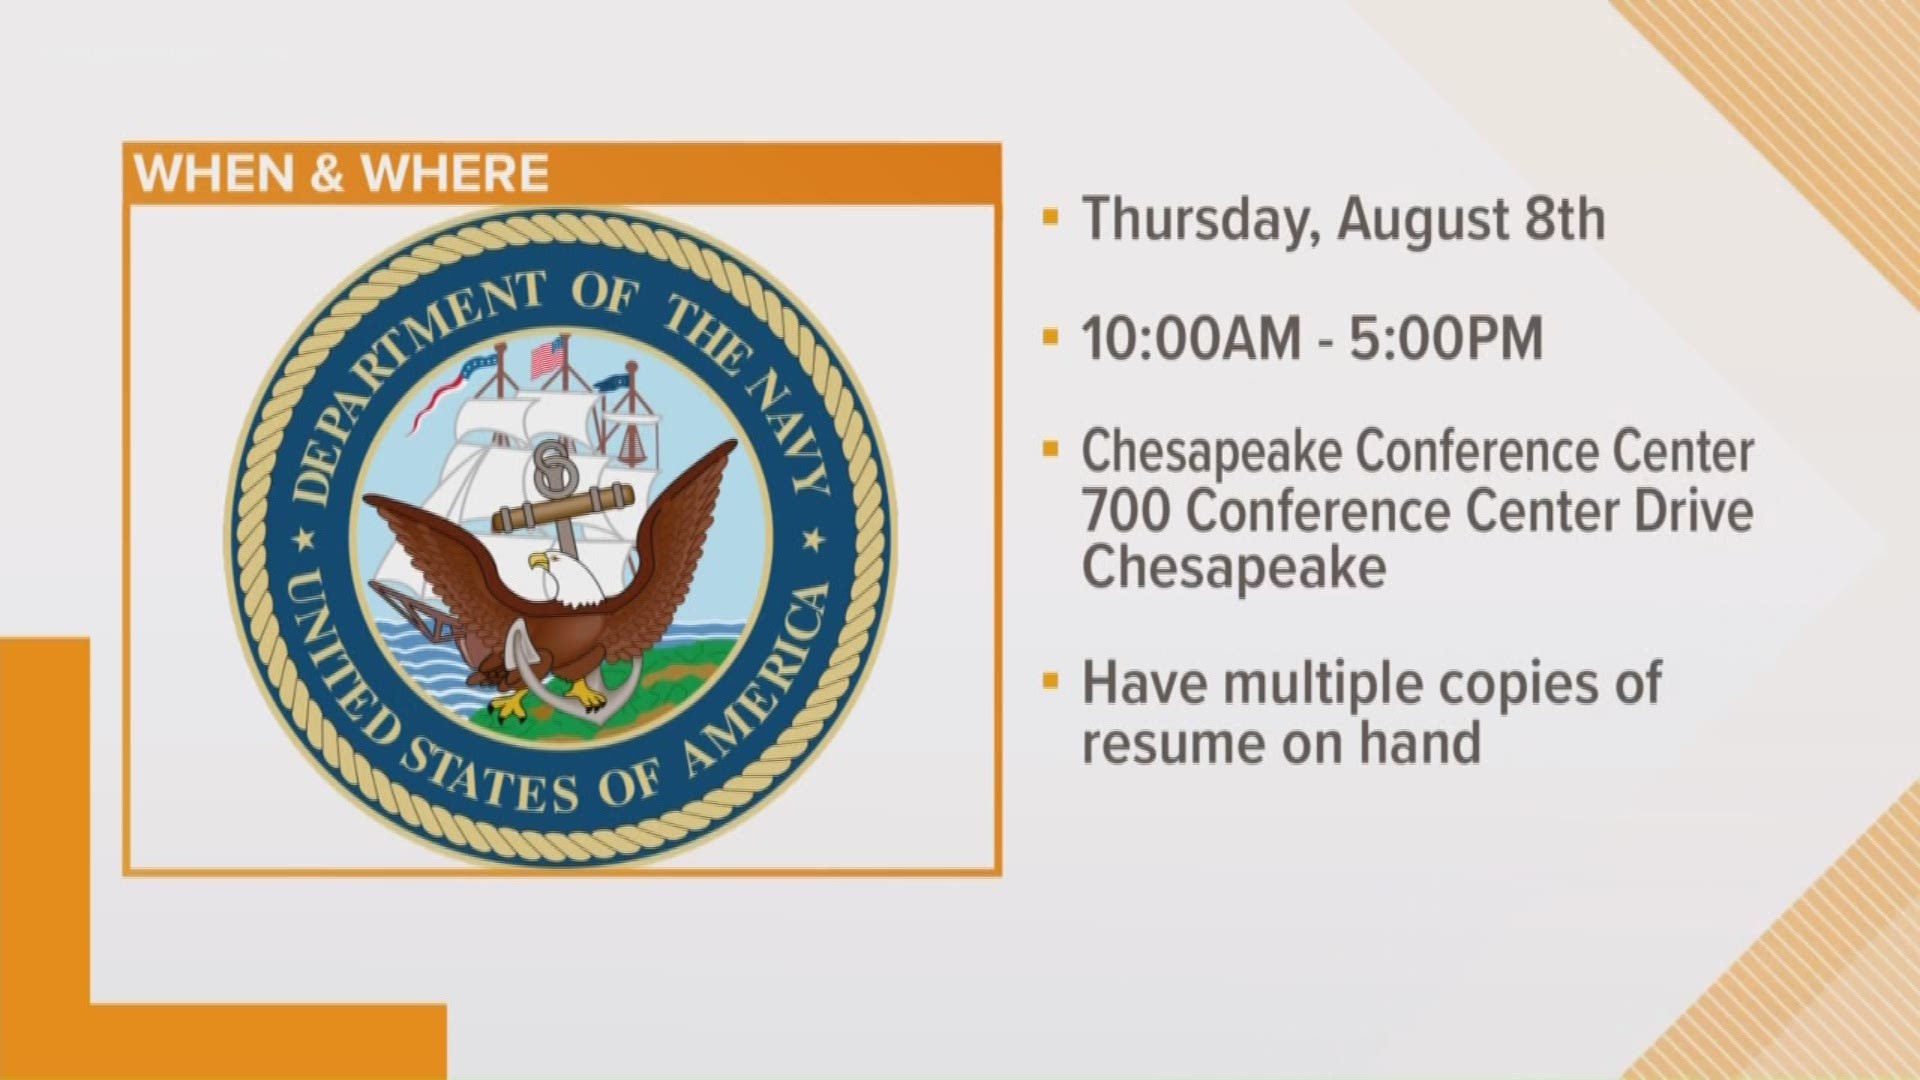 Three Navy Commands are hosting a job fair in Chesapeake for IT-related jobs.